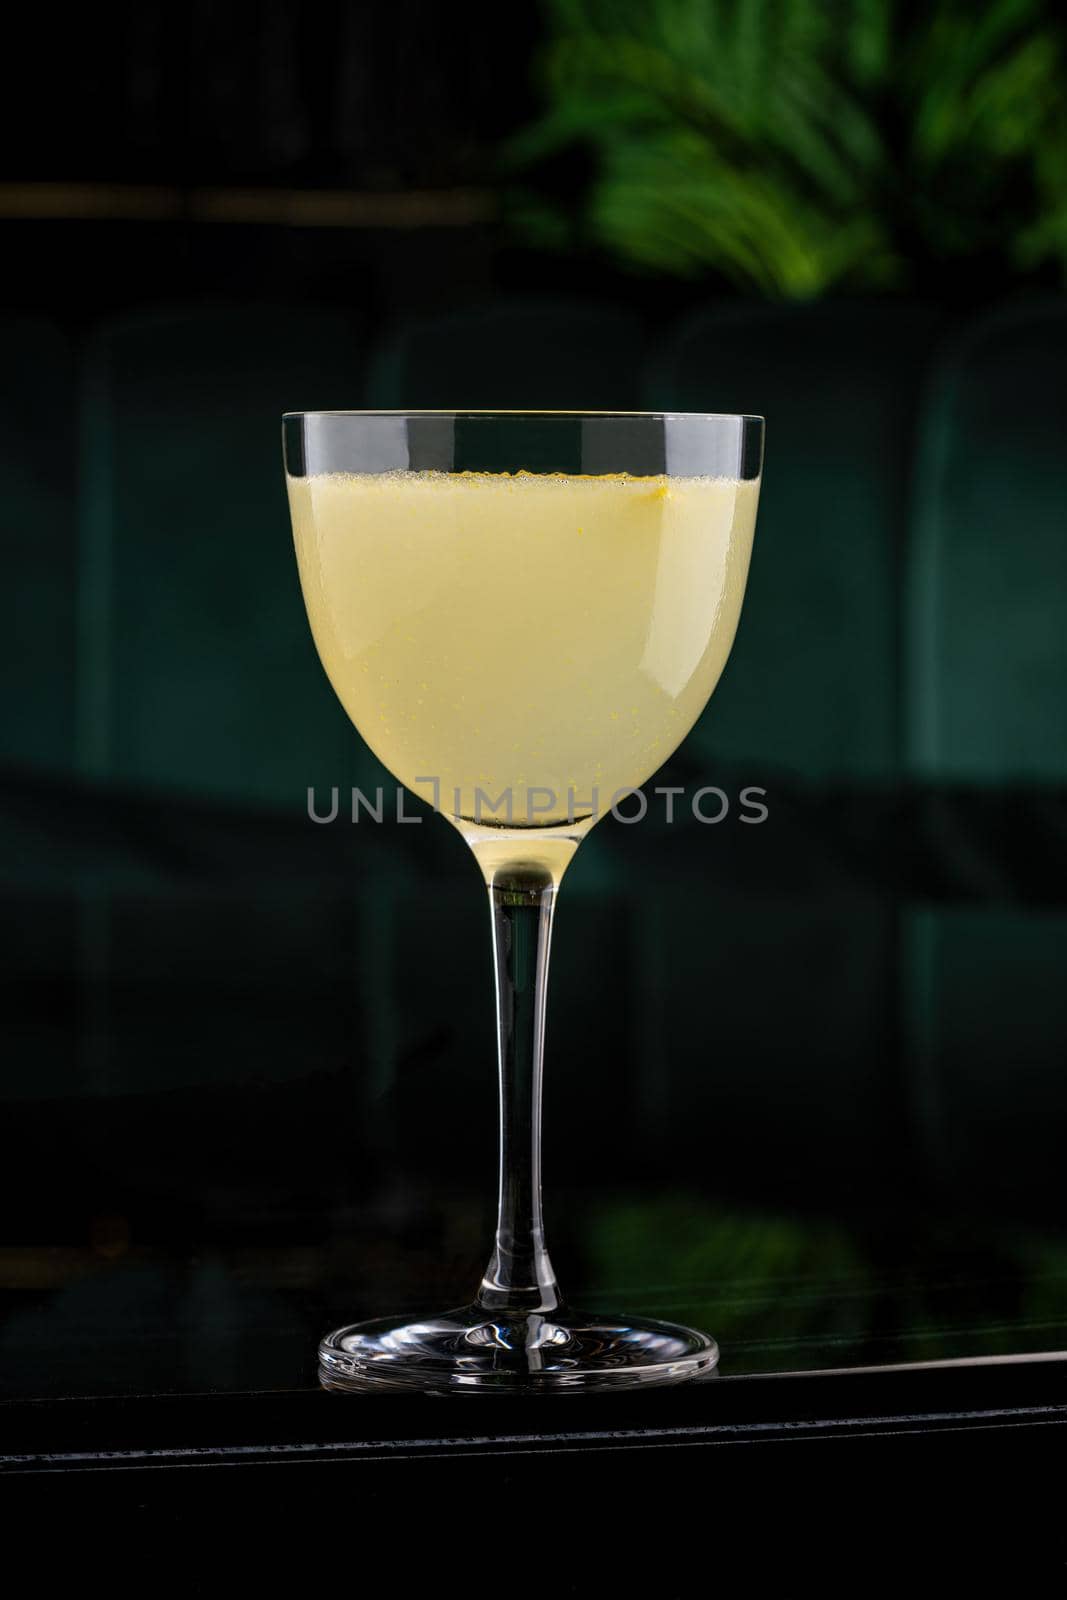 Iced yellow lemon and citrus cocktail with lemon zest by Sonat